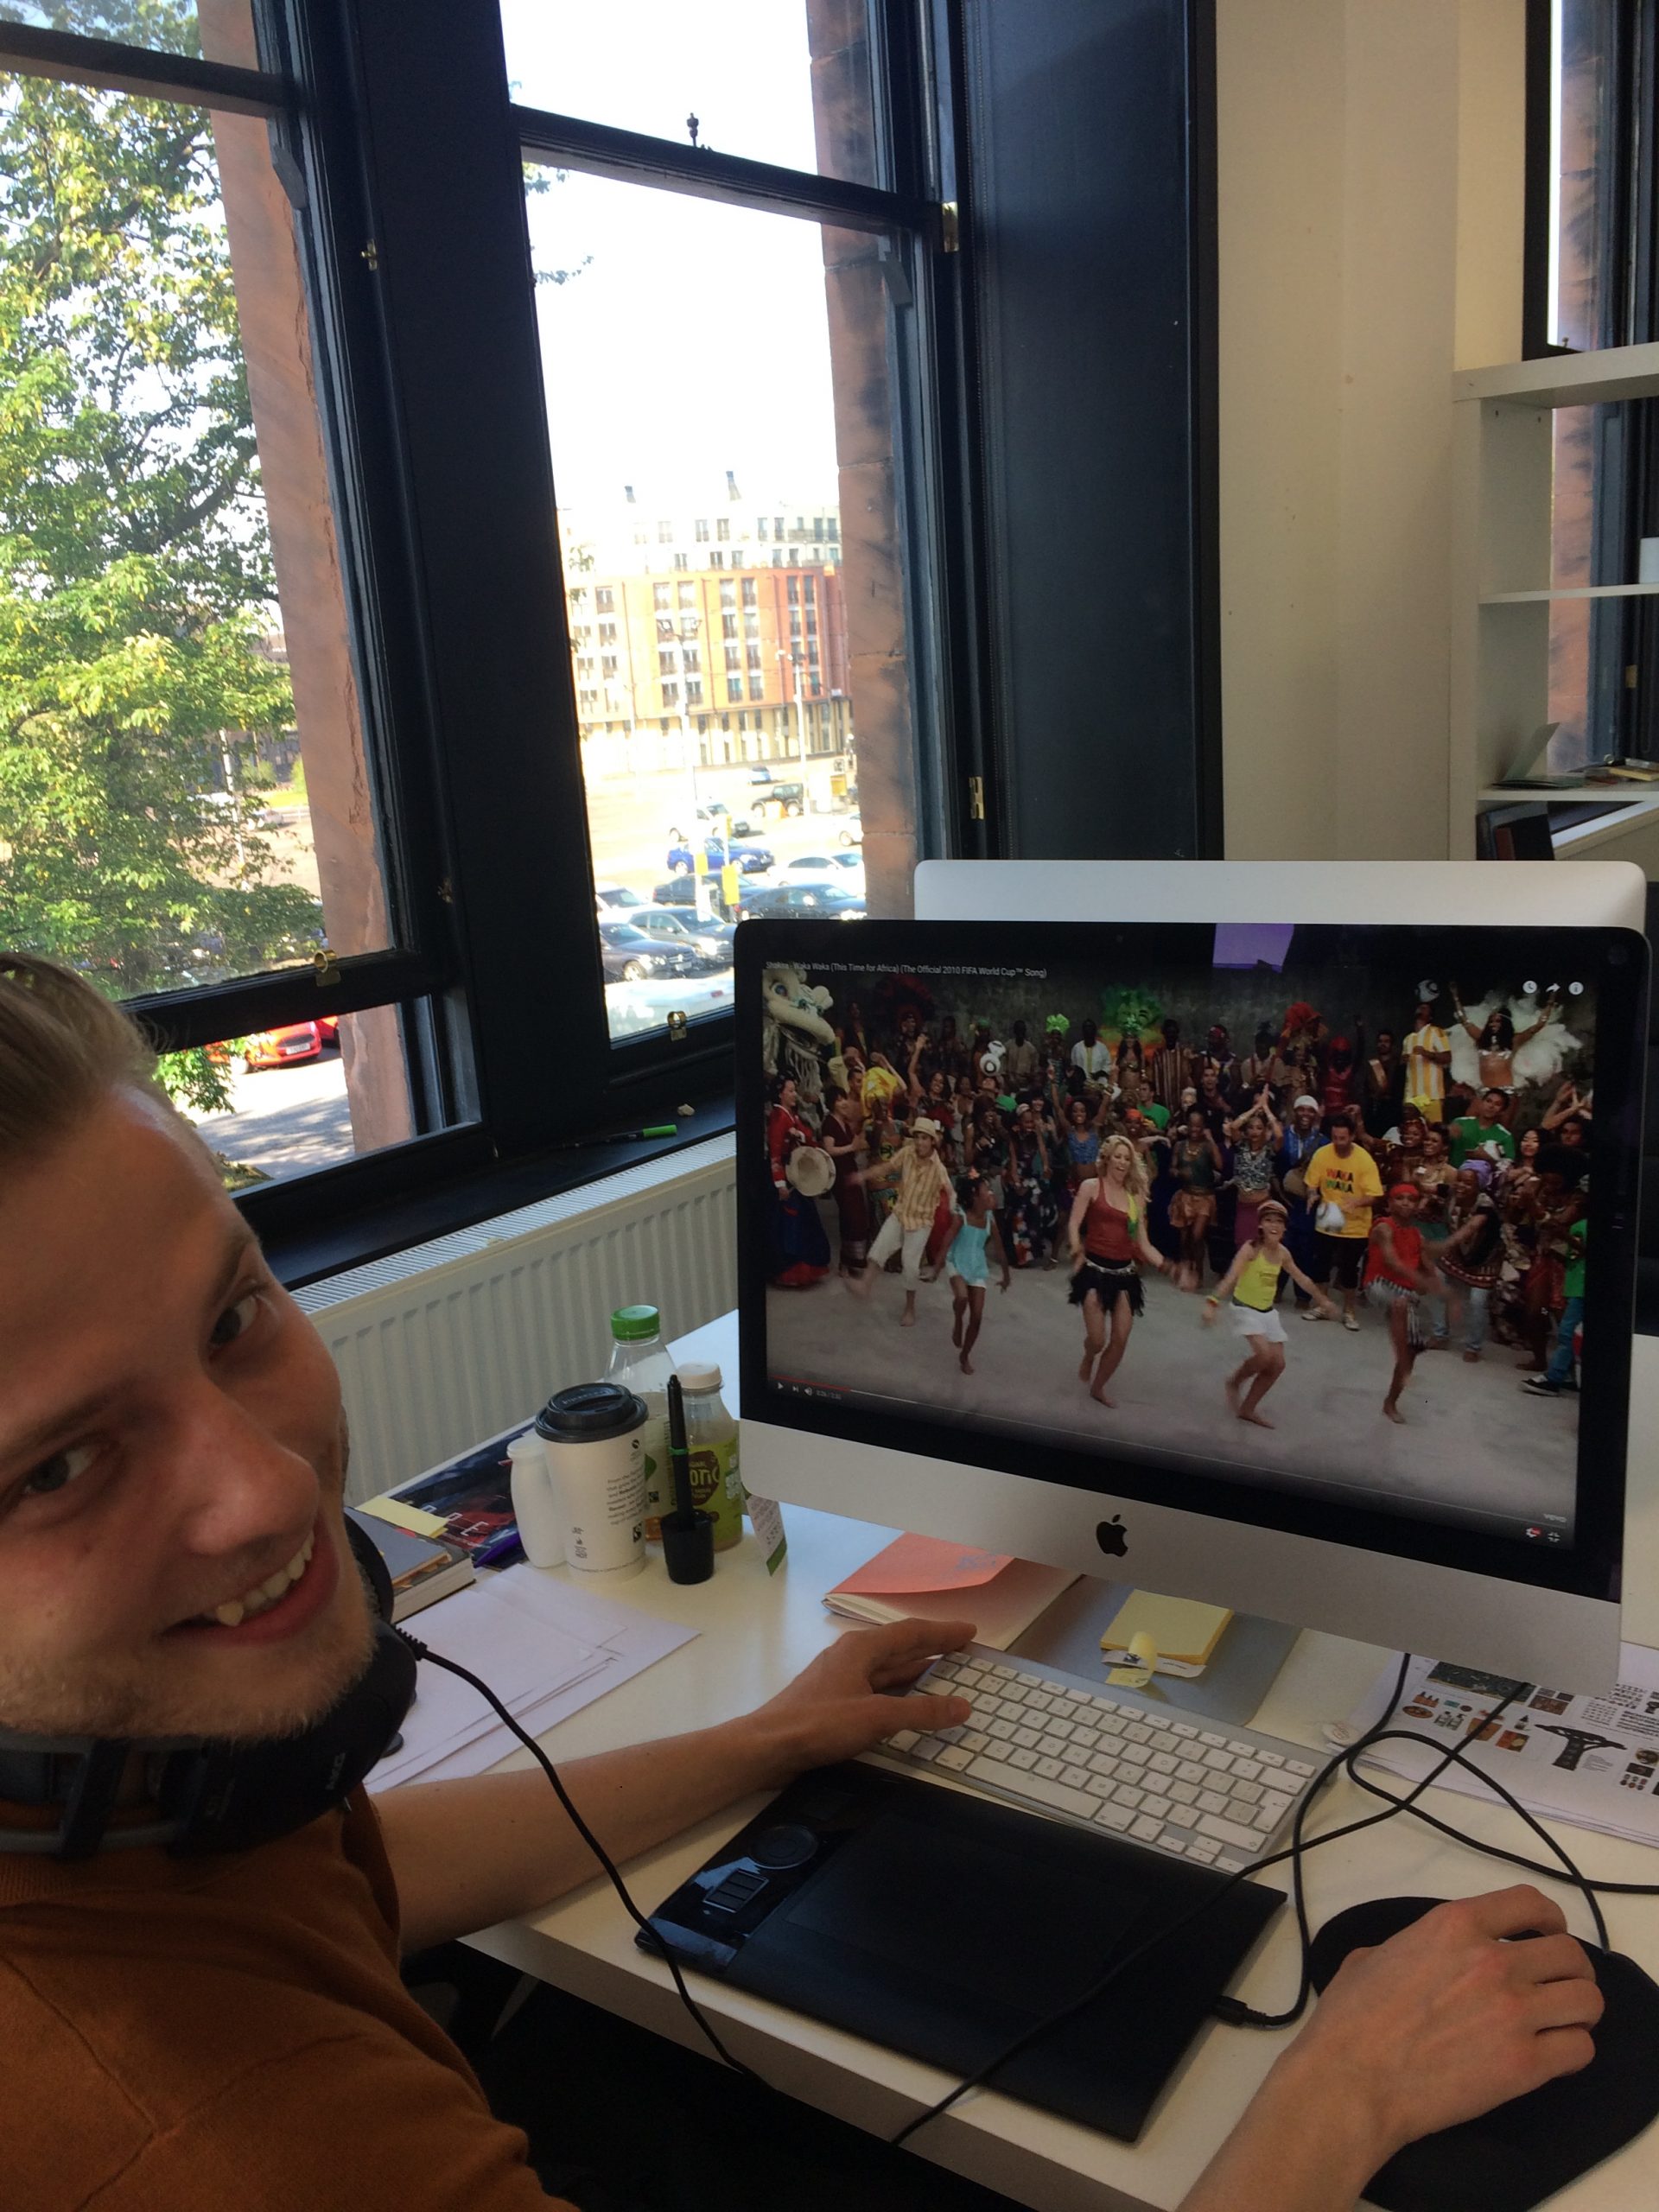 ’Shakira!’ Our designer Marek gaining previous research and insights for the Baotic brand by watching Shakira own his Mac.